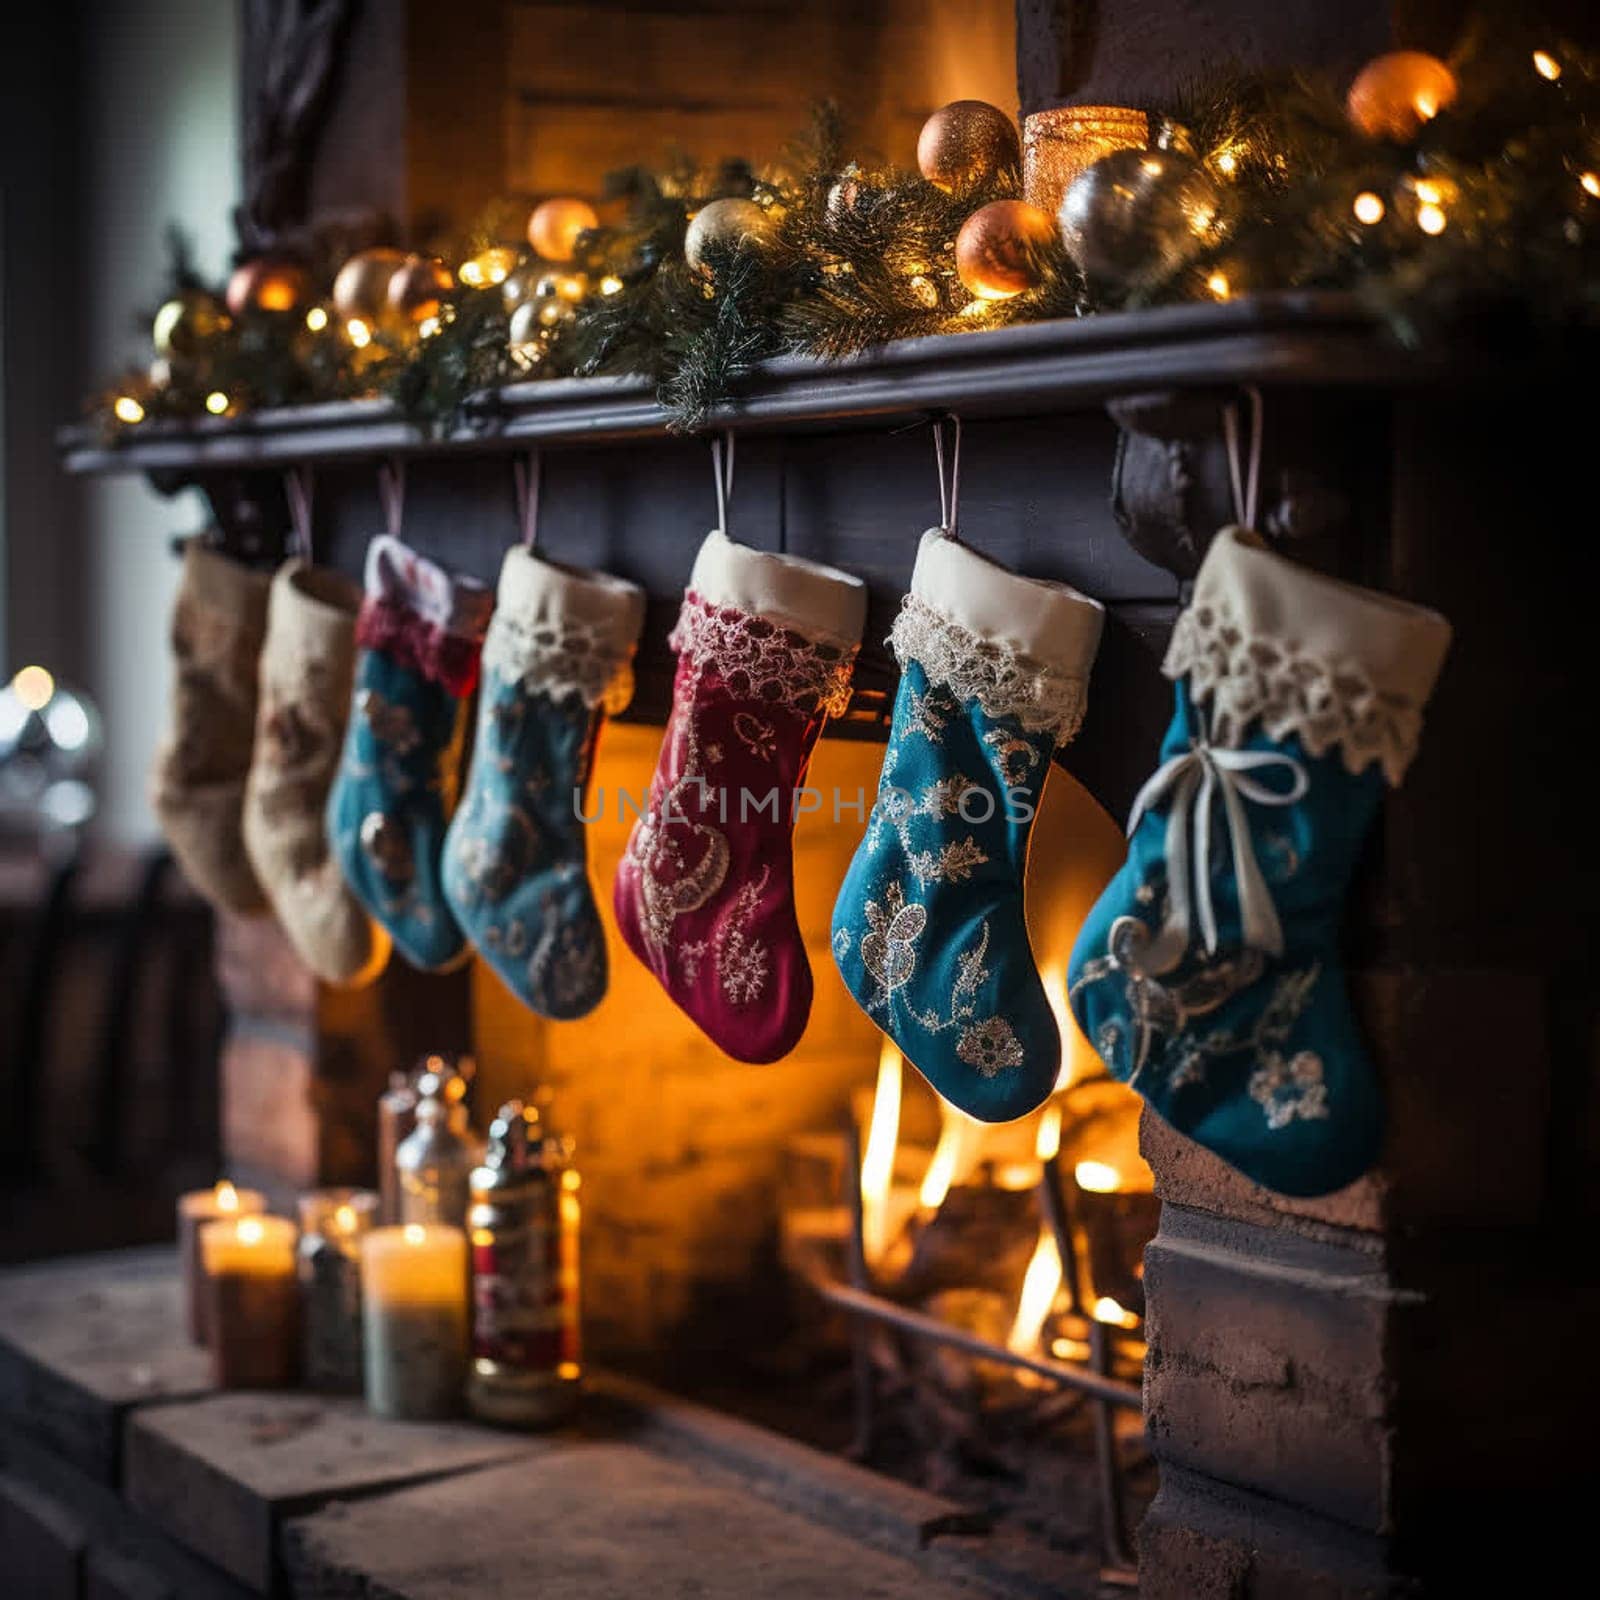 Christmas Socks With Gifts Near Fireplace In Festive Decorated Living Room by ekaterinabyuksel